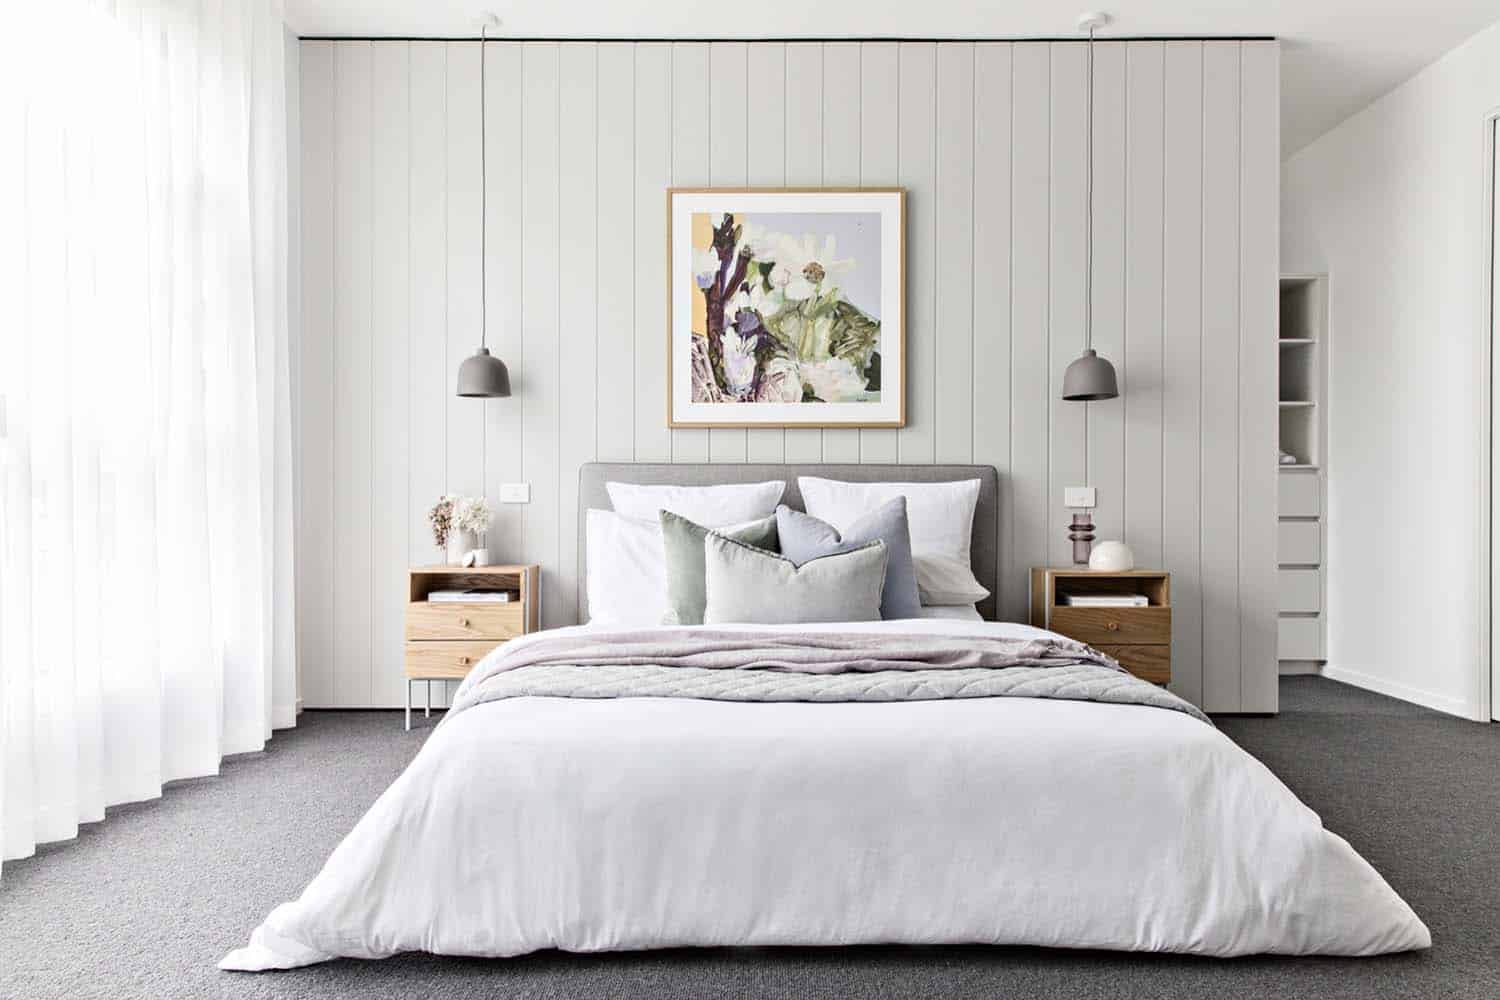 Scandinavian style bedroom with a wood panel wall and pendant lights